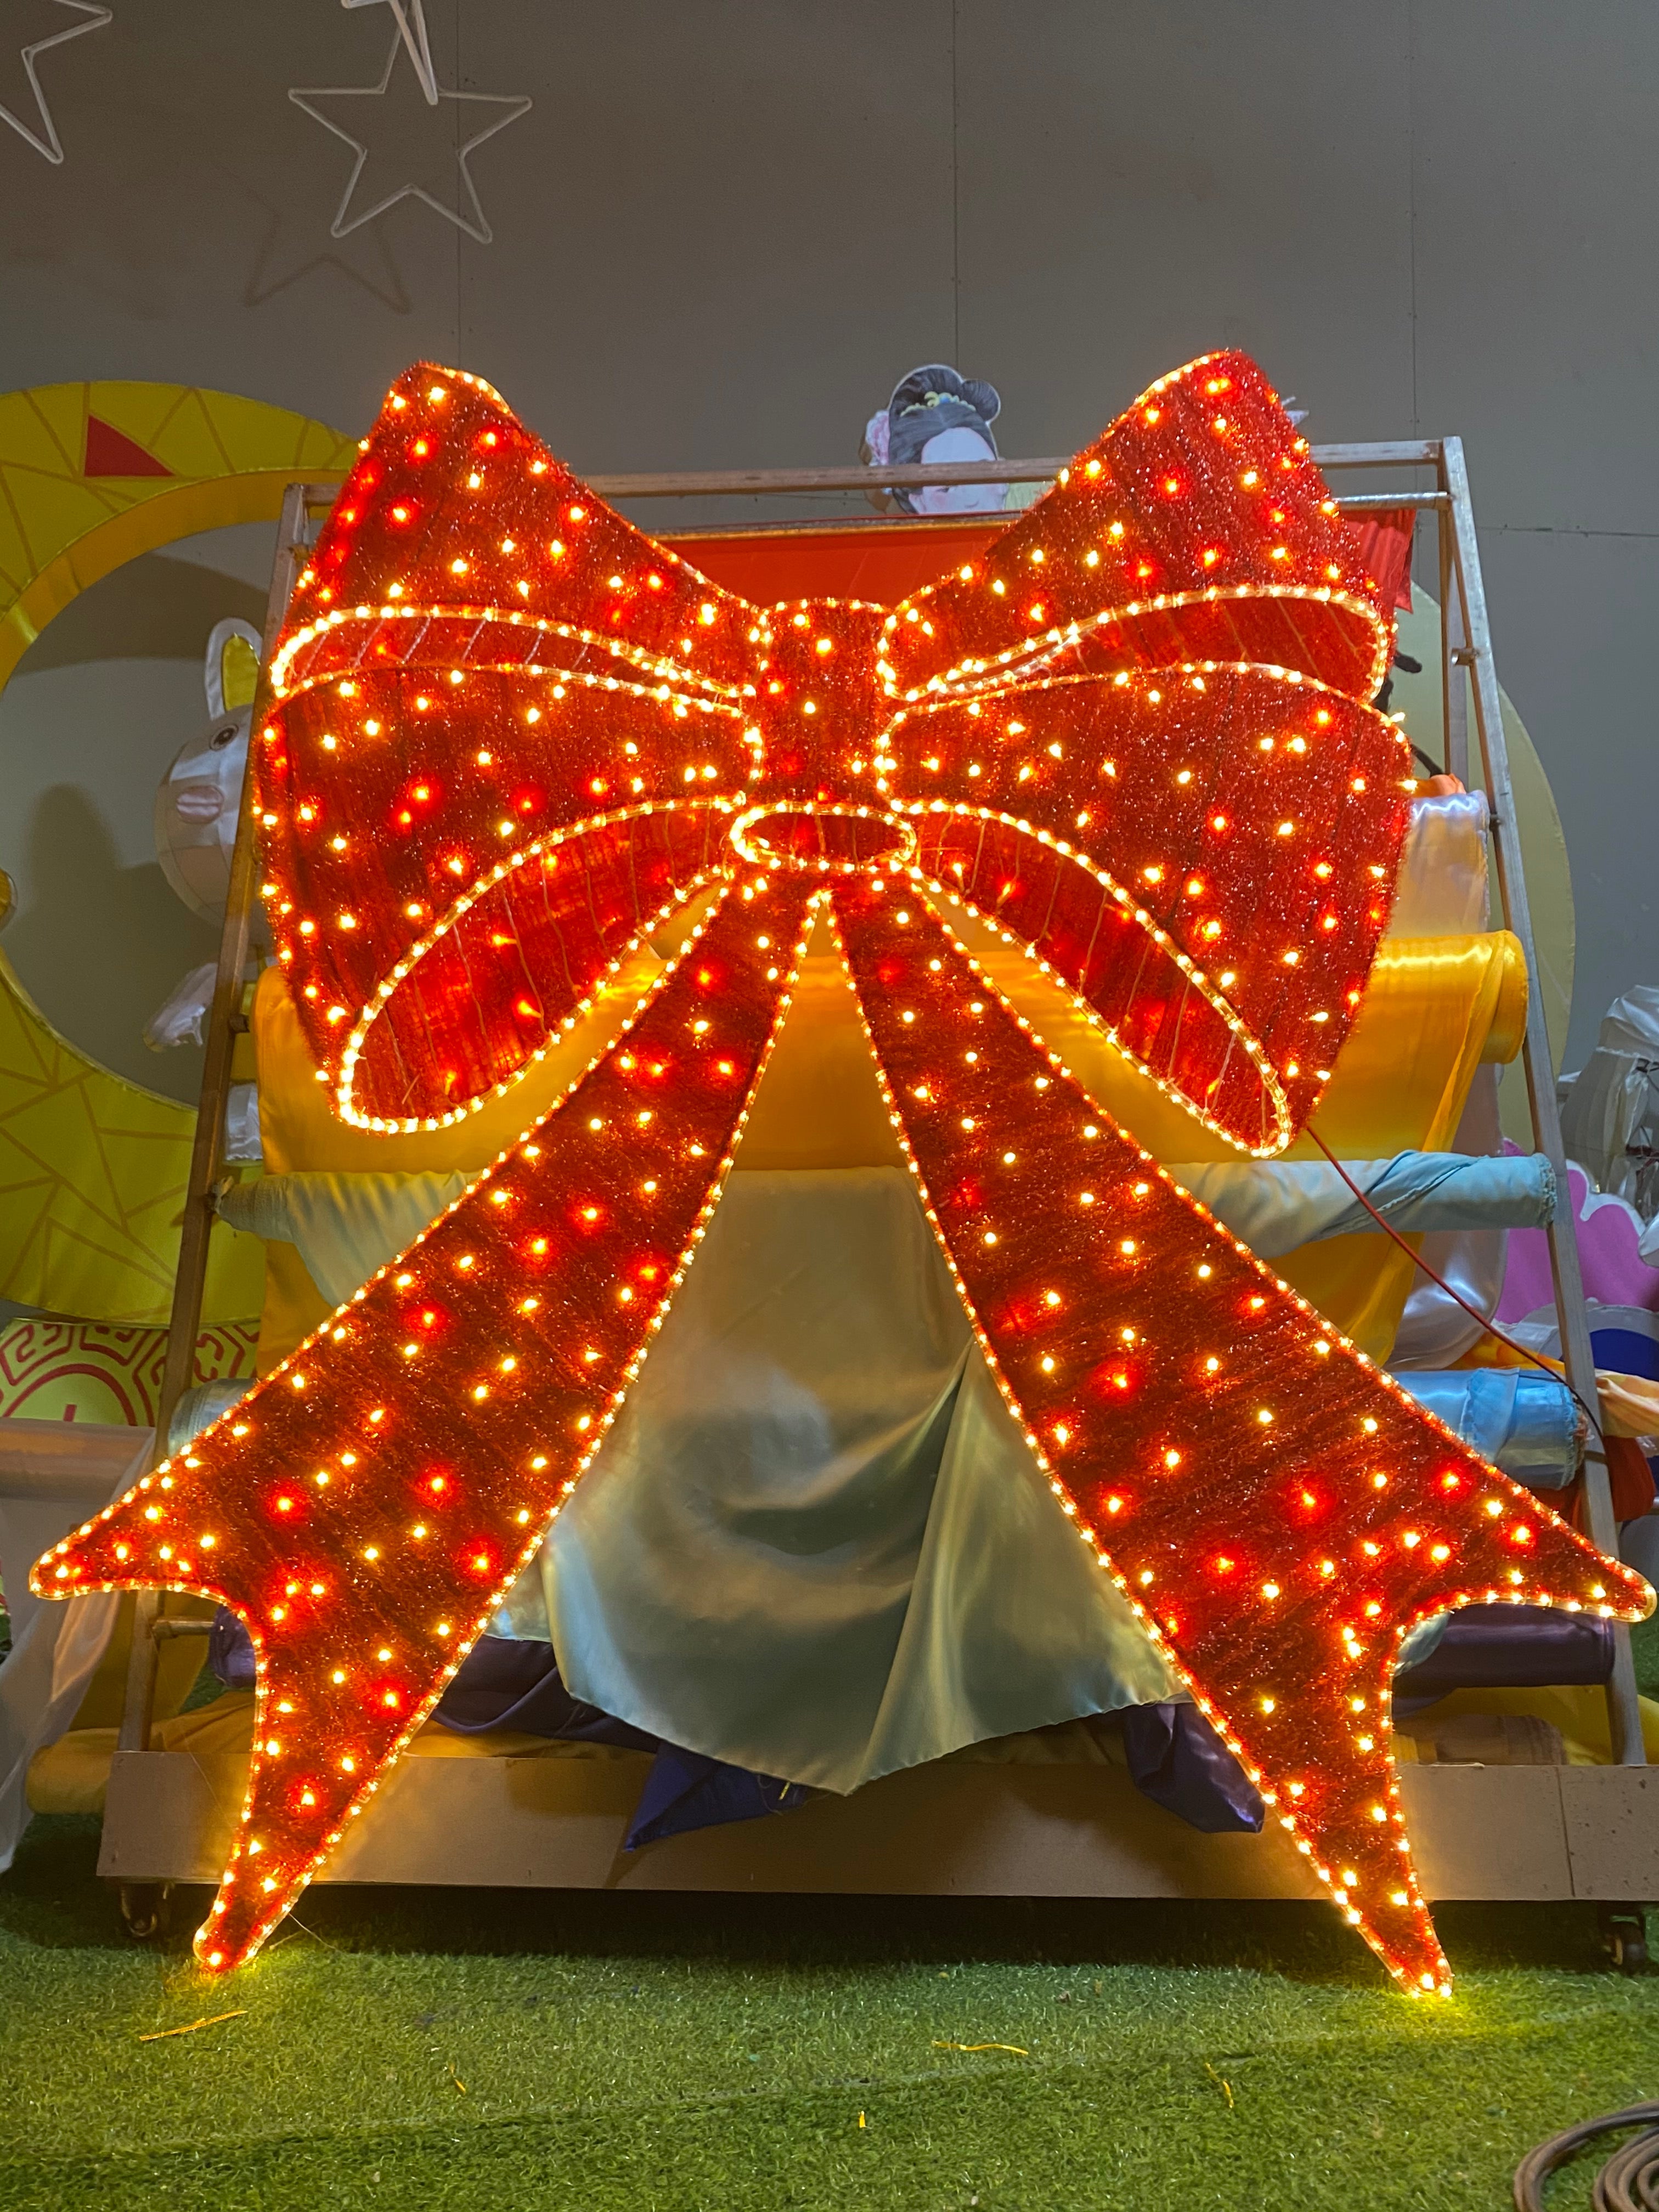 Best selling giant lighting Christmas bow for outdoor – Wild Art Decoration